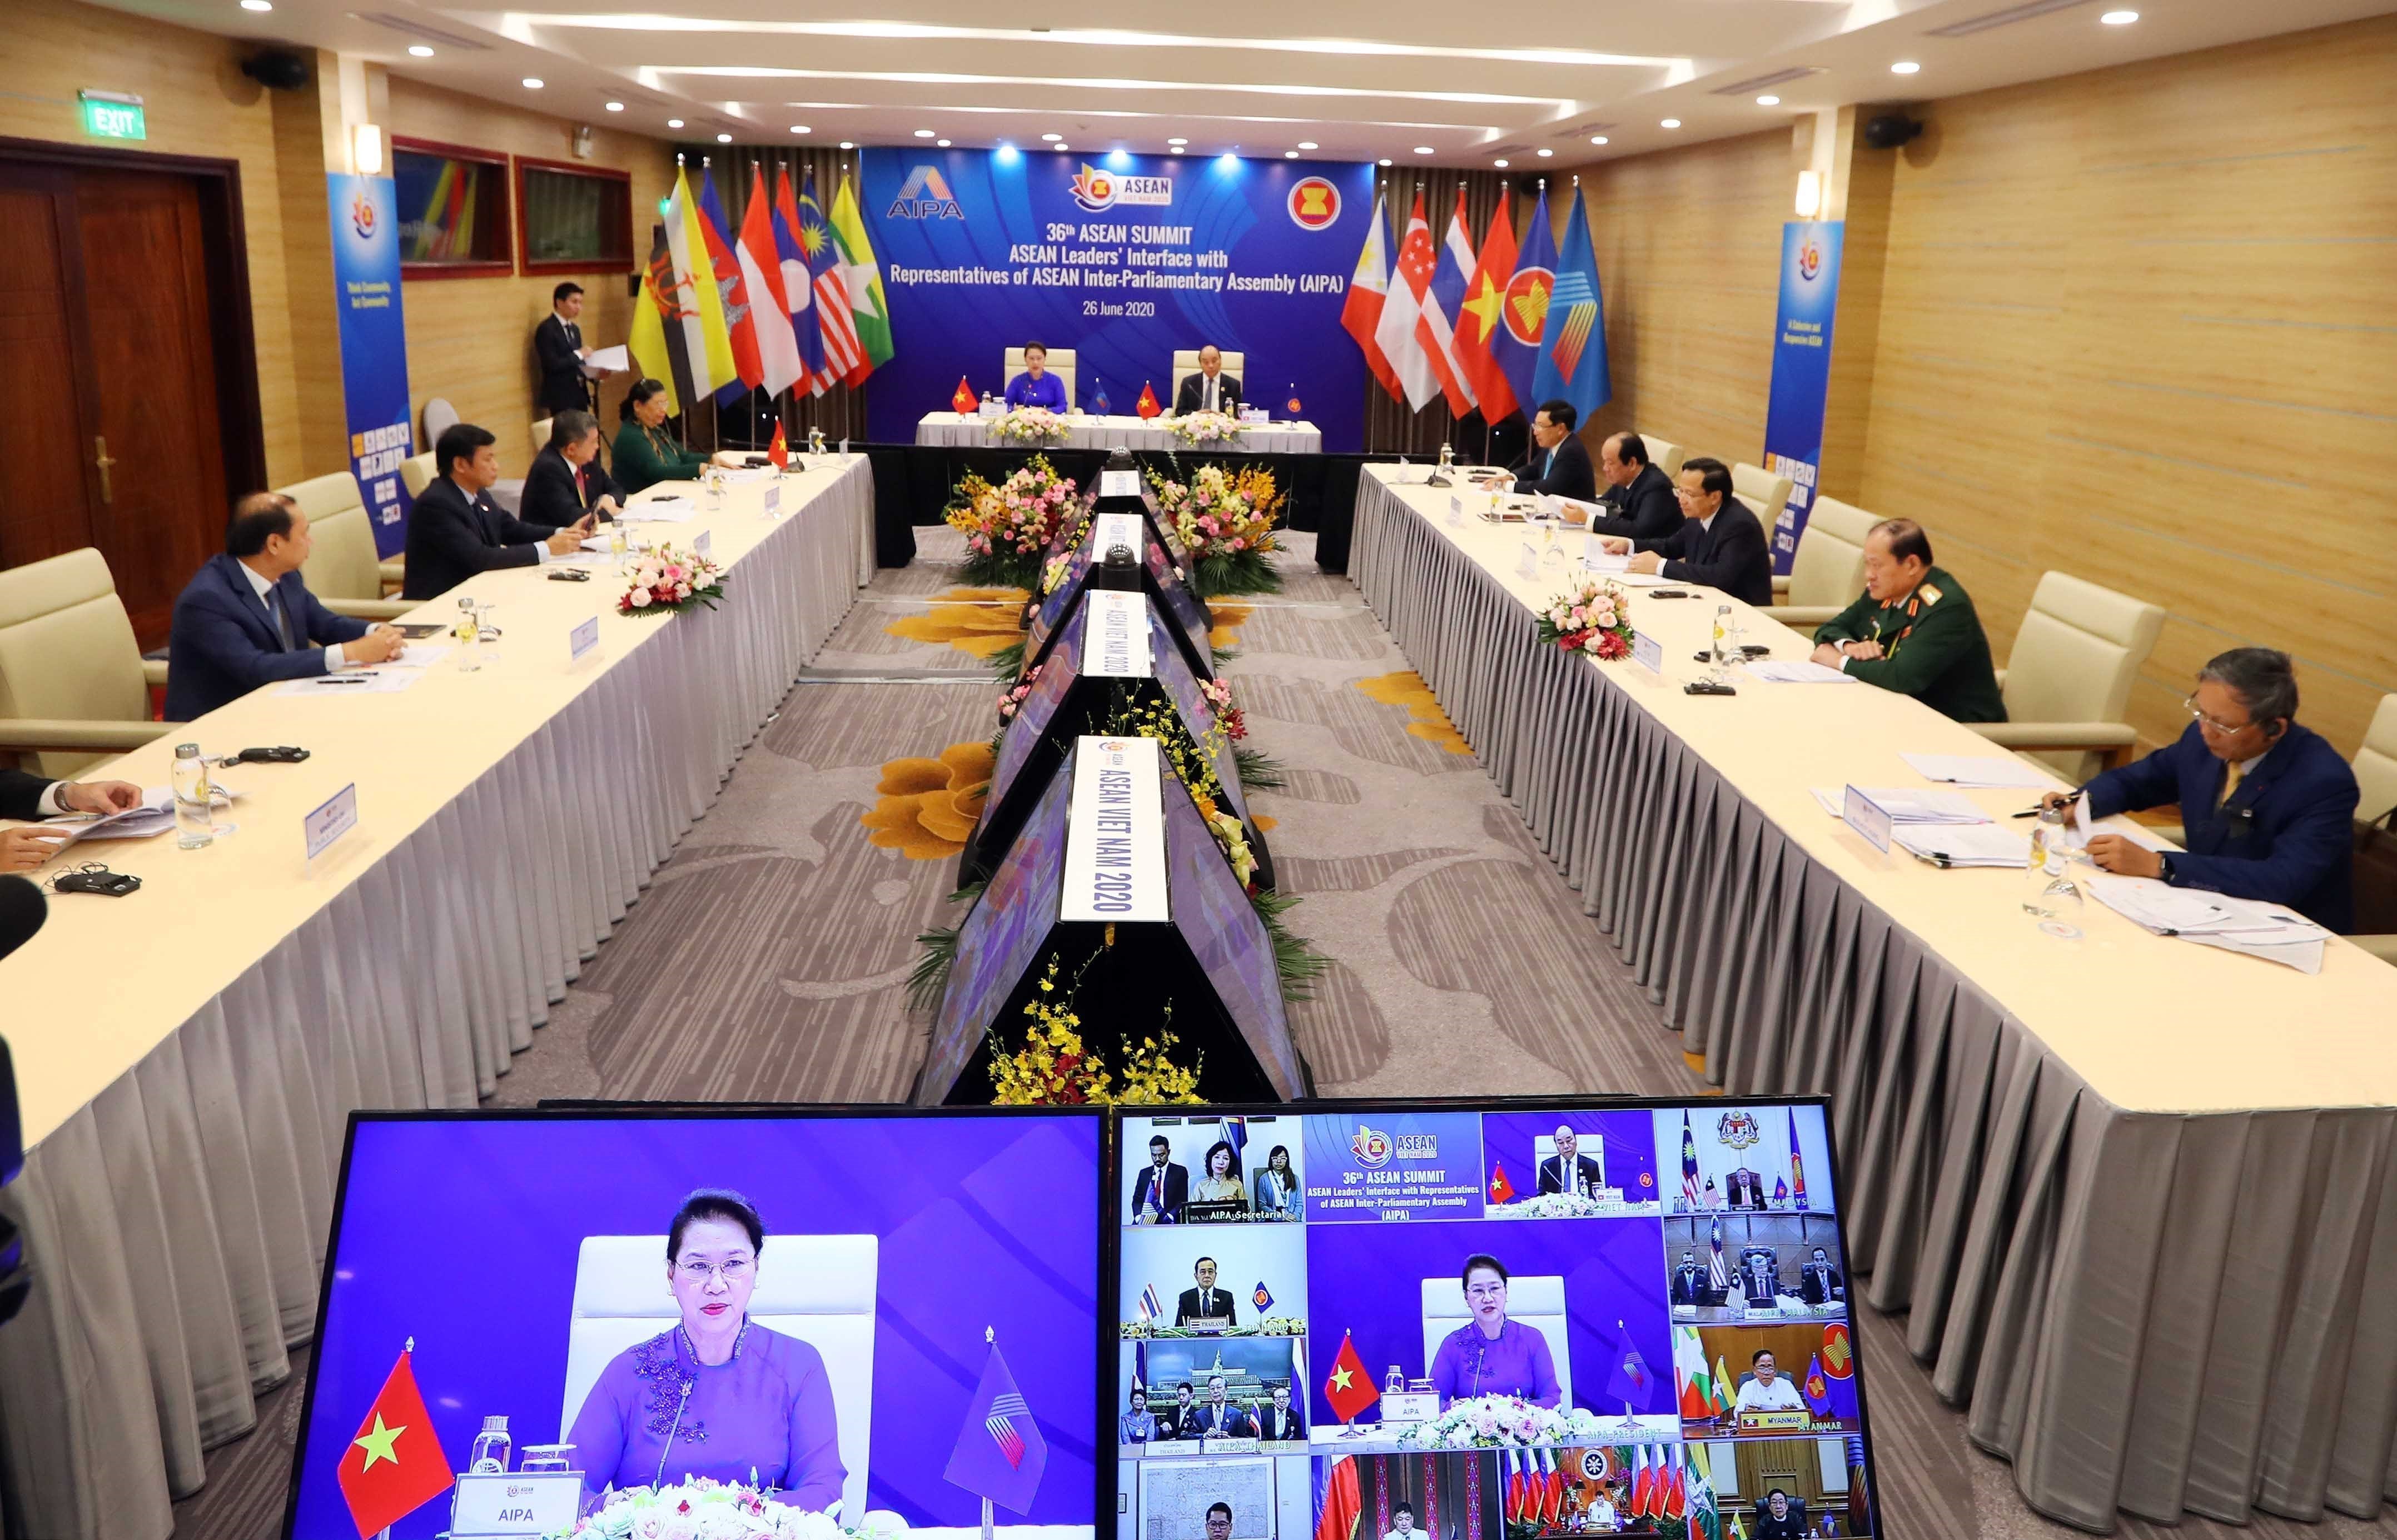 ASEAN Leaders’ Interface with Representatives of ASEAN Inter-Parliamentary Assembly hinh anh 8